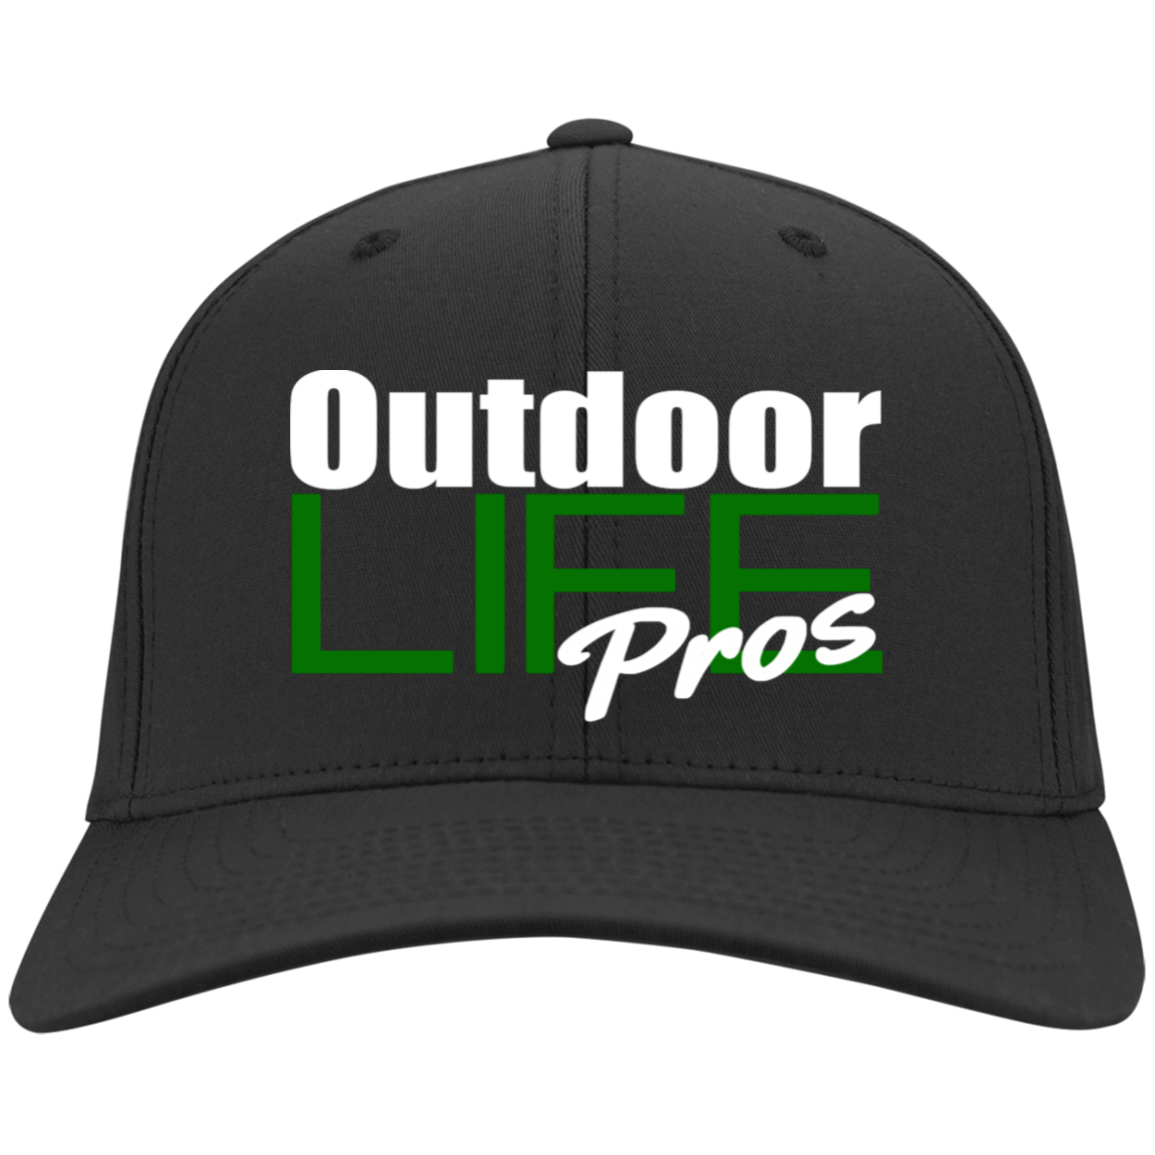 OUTDOOR LIFE PROS CP80 Embroidered Twill Cap